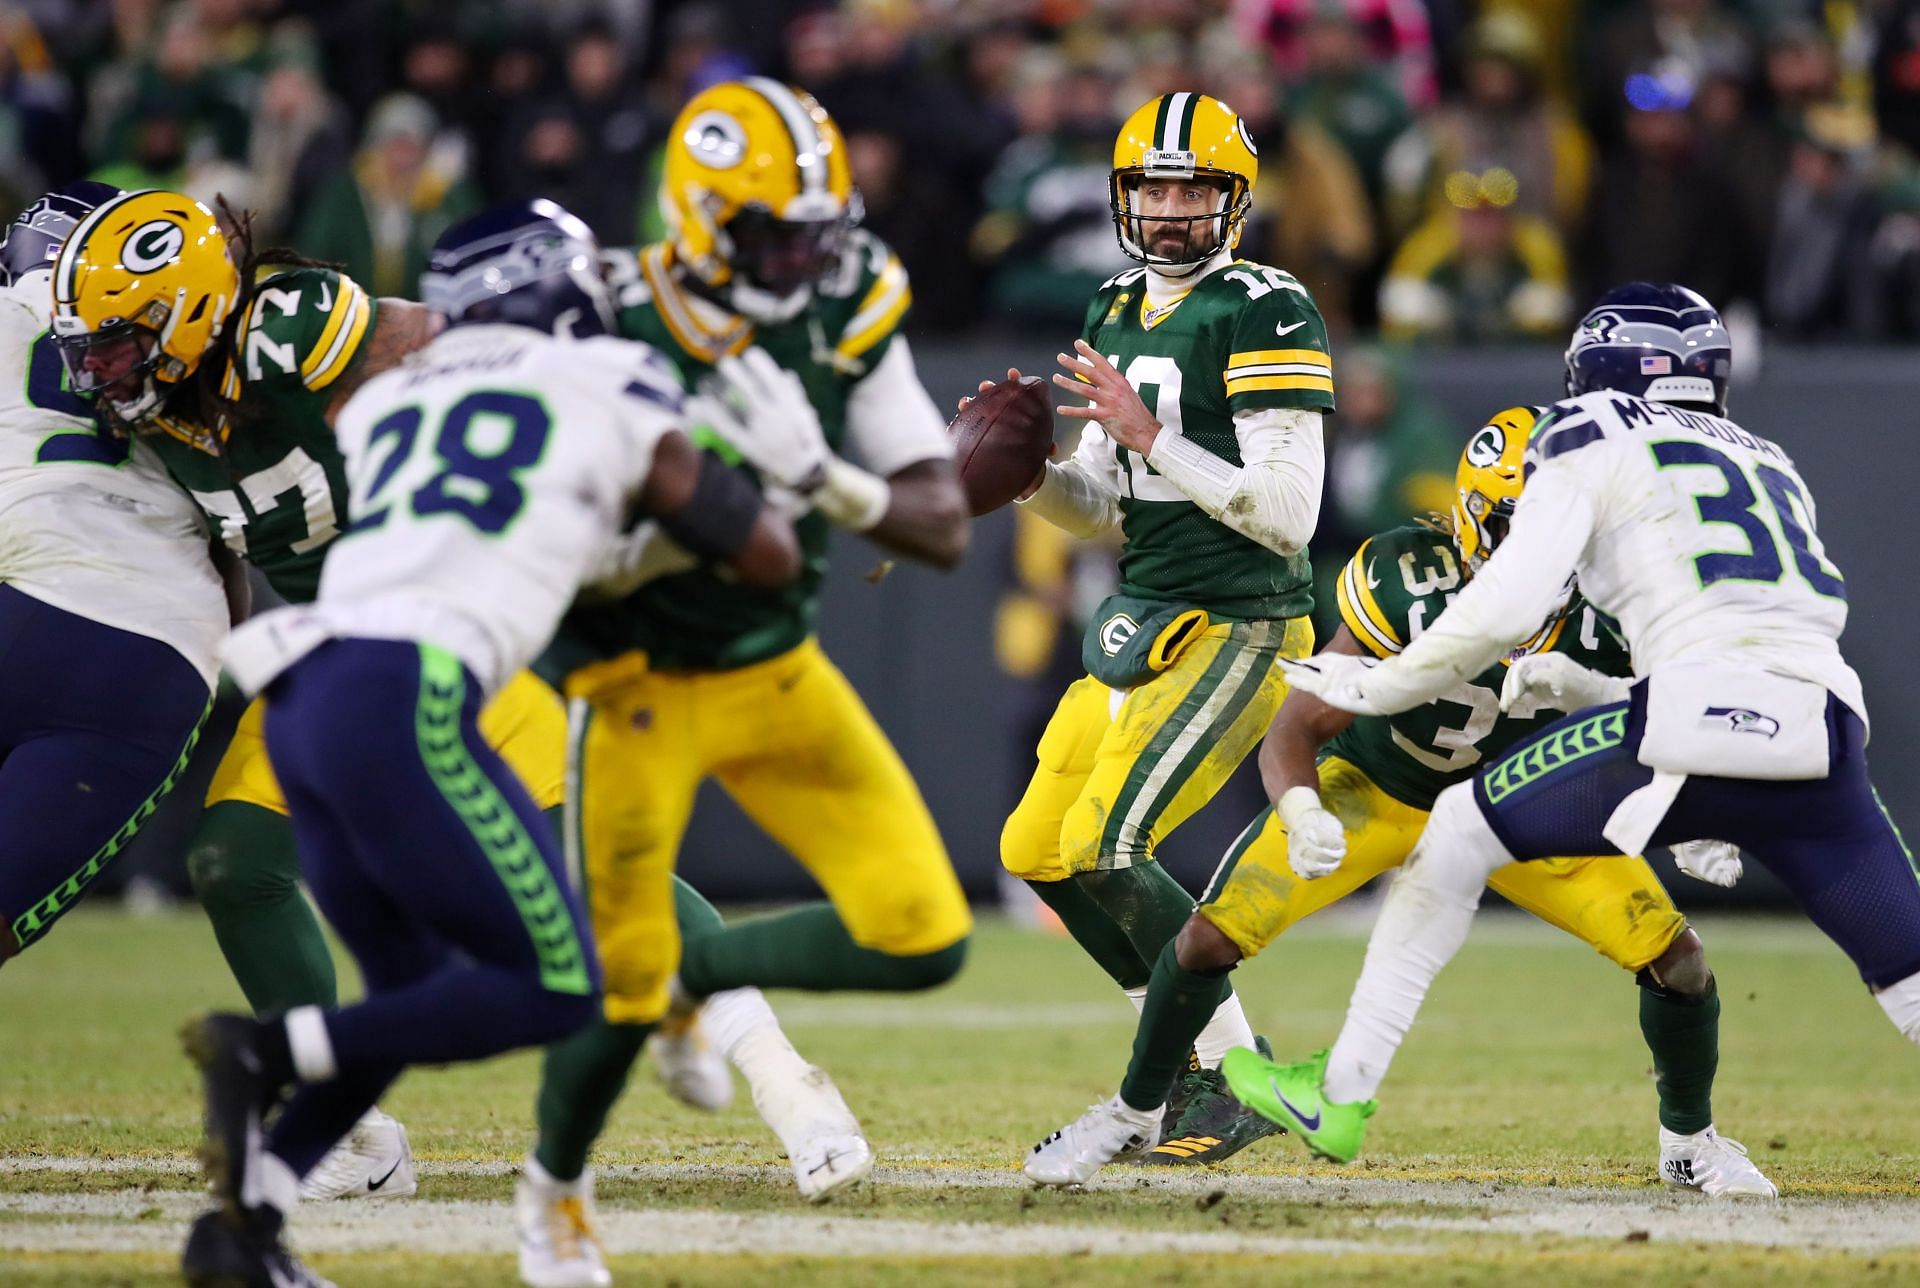 Aaron Rodgers of Green Bay Packers vs. Seattle Seahawks